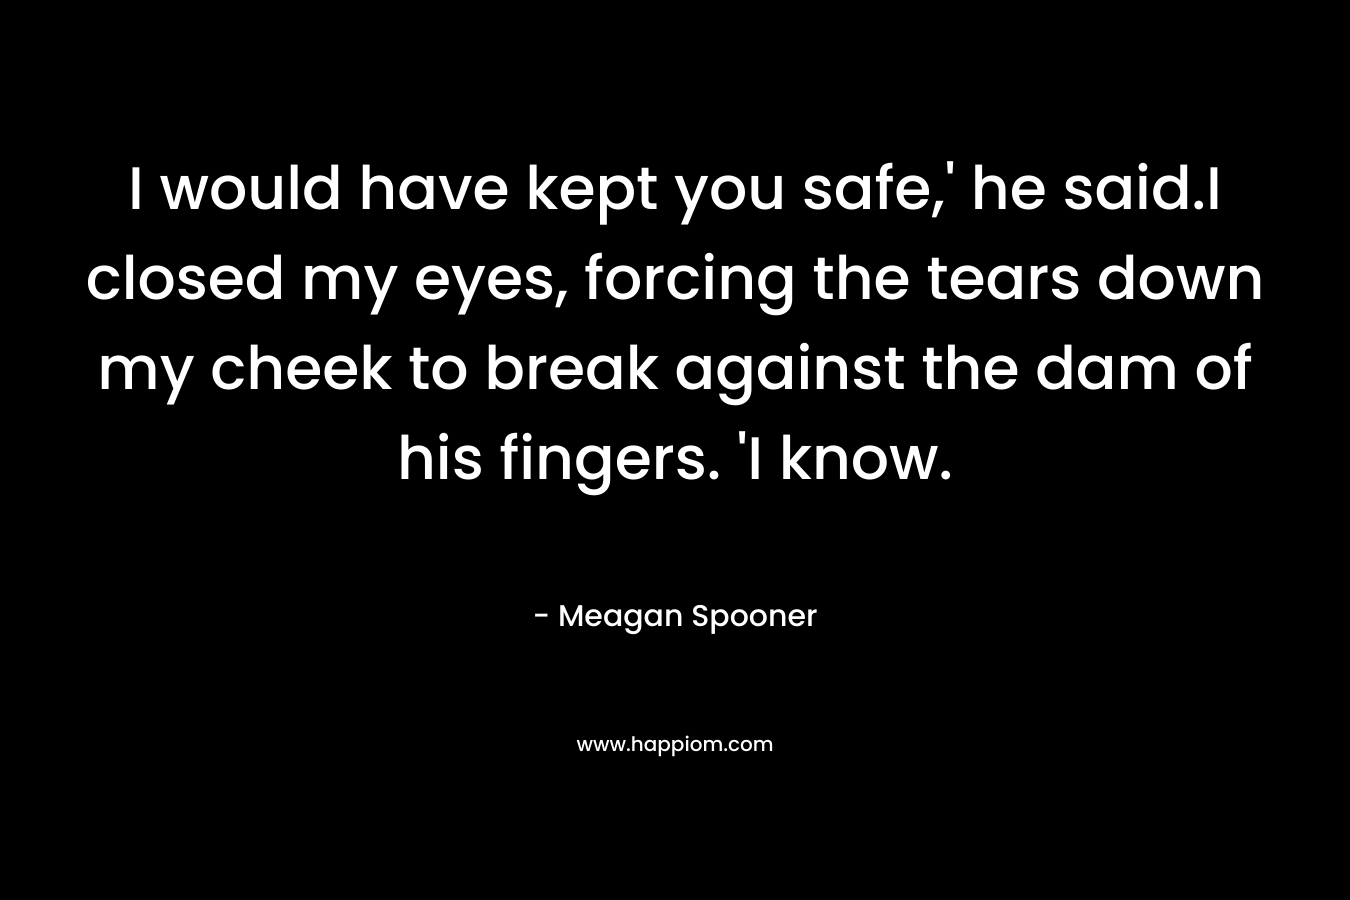 I would have kept you safe,’ he said.I closed my eyes, forcing the tears down my cheek to break against the dam of his fingers. ‘I know. – Meagan Spooner